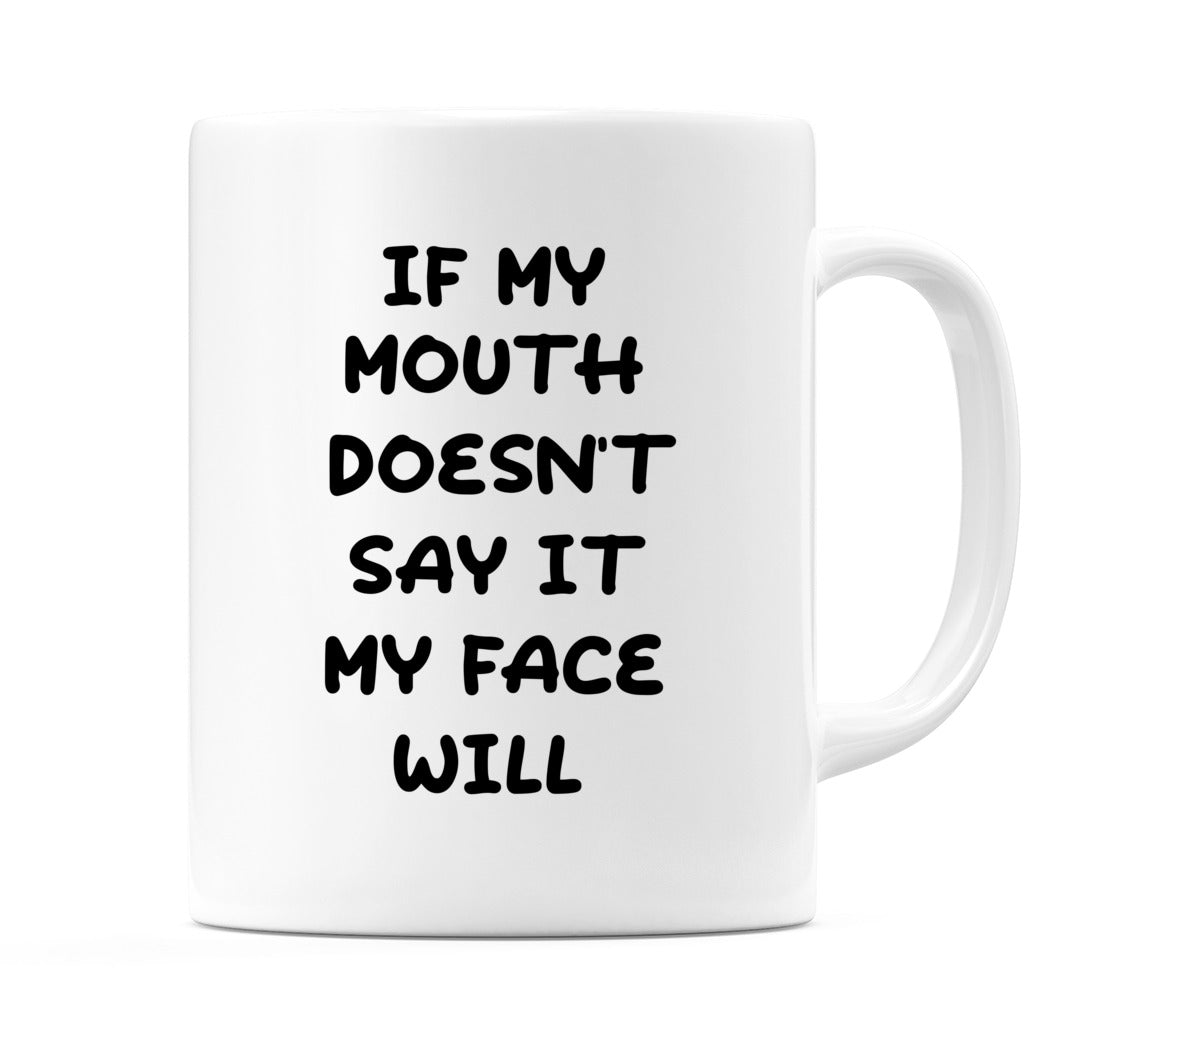 If my mouth doesn't say it my face will Mug